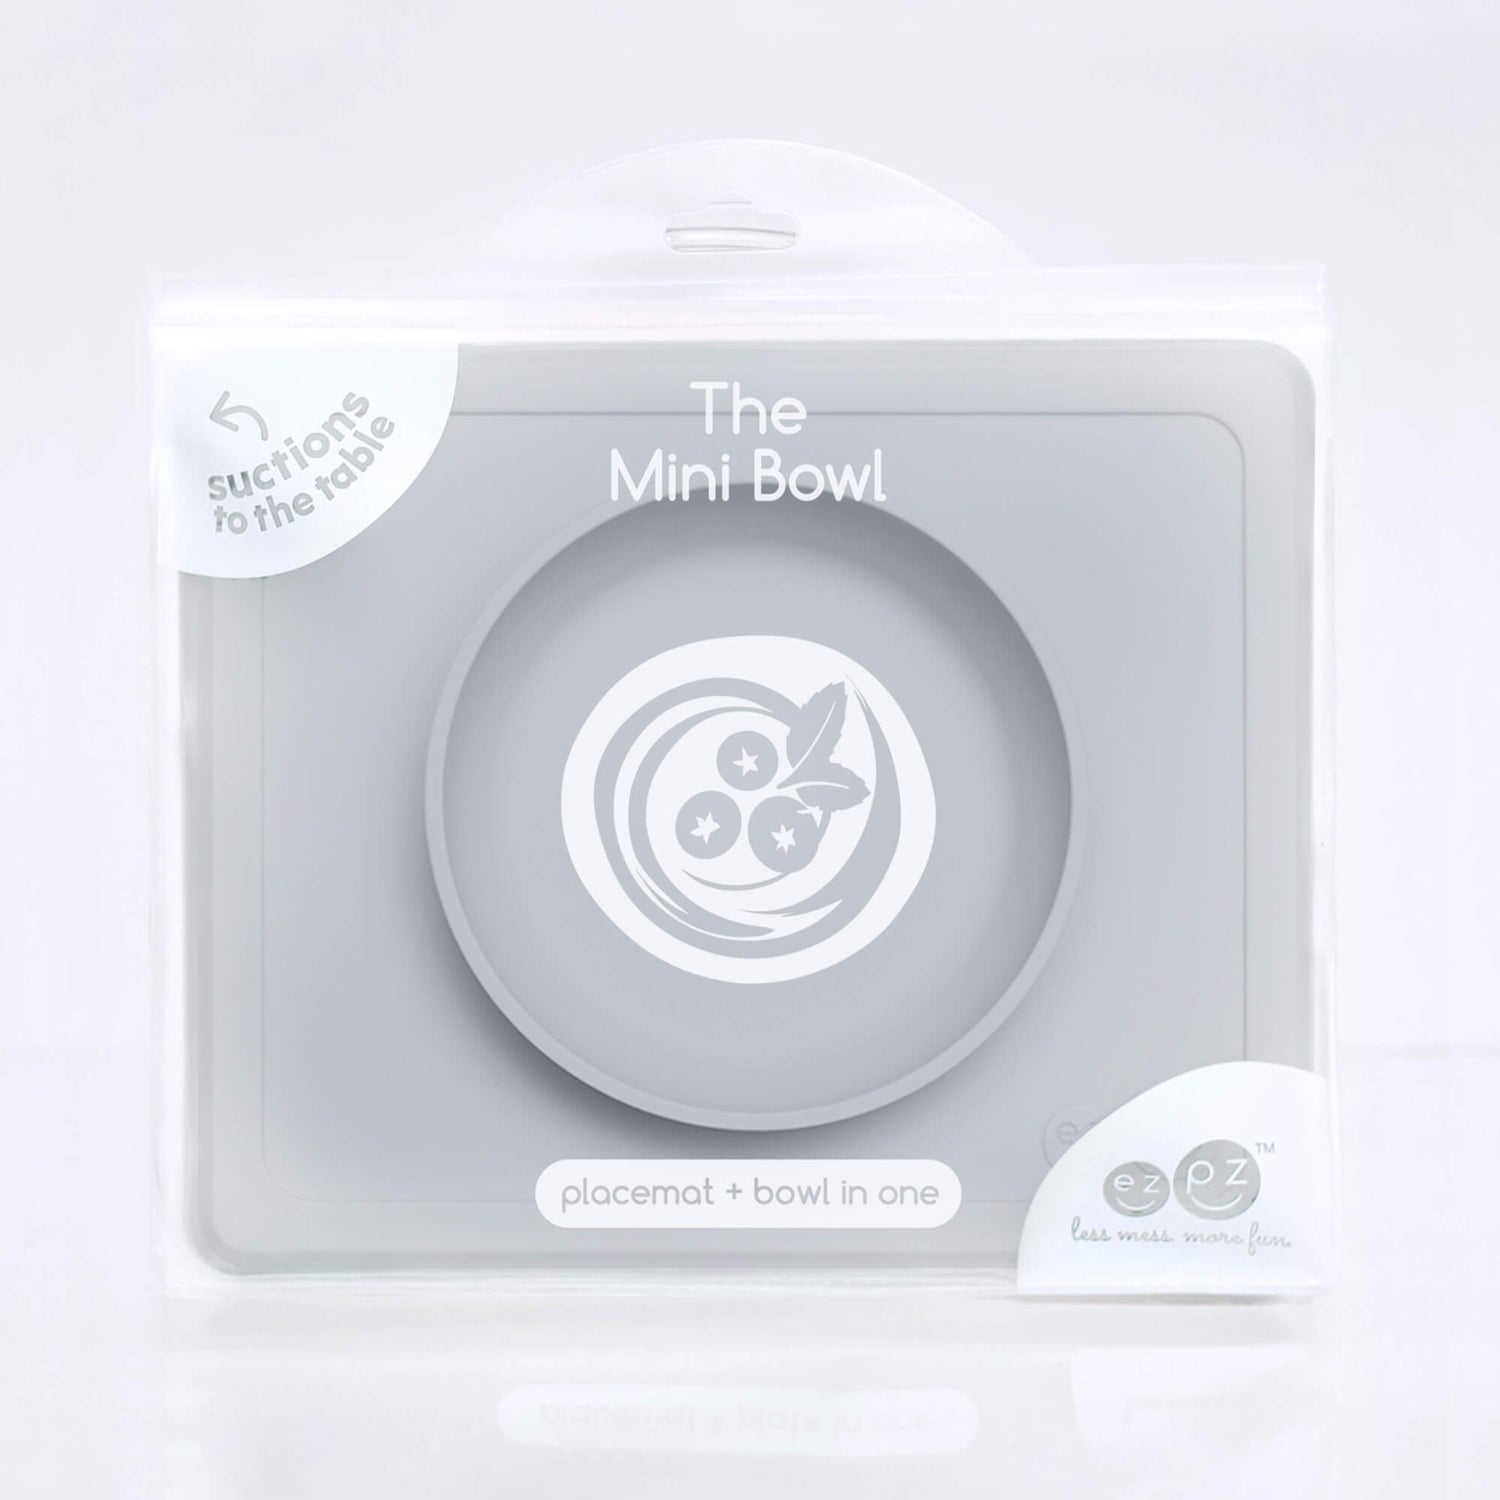 Mini Bowl in Pewter by ezpz / The Original All-In-One Silicone Plates & Placemats that Stick to the Table